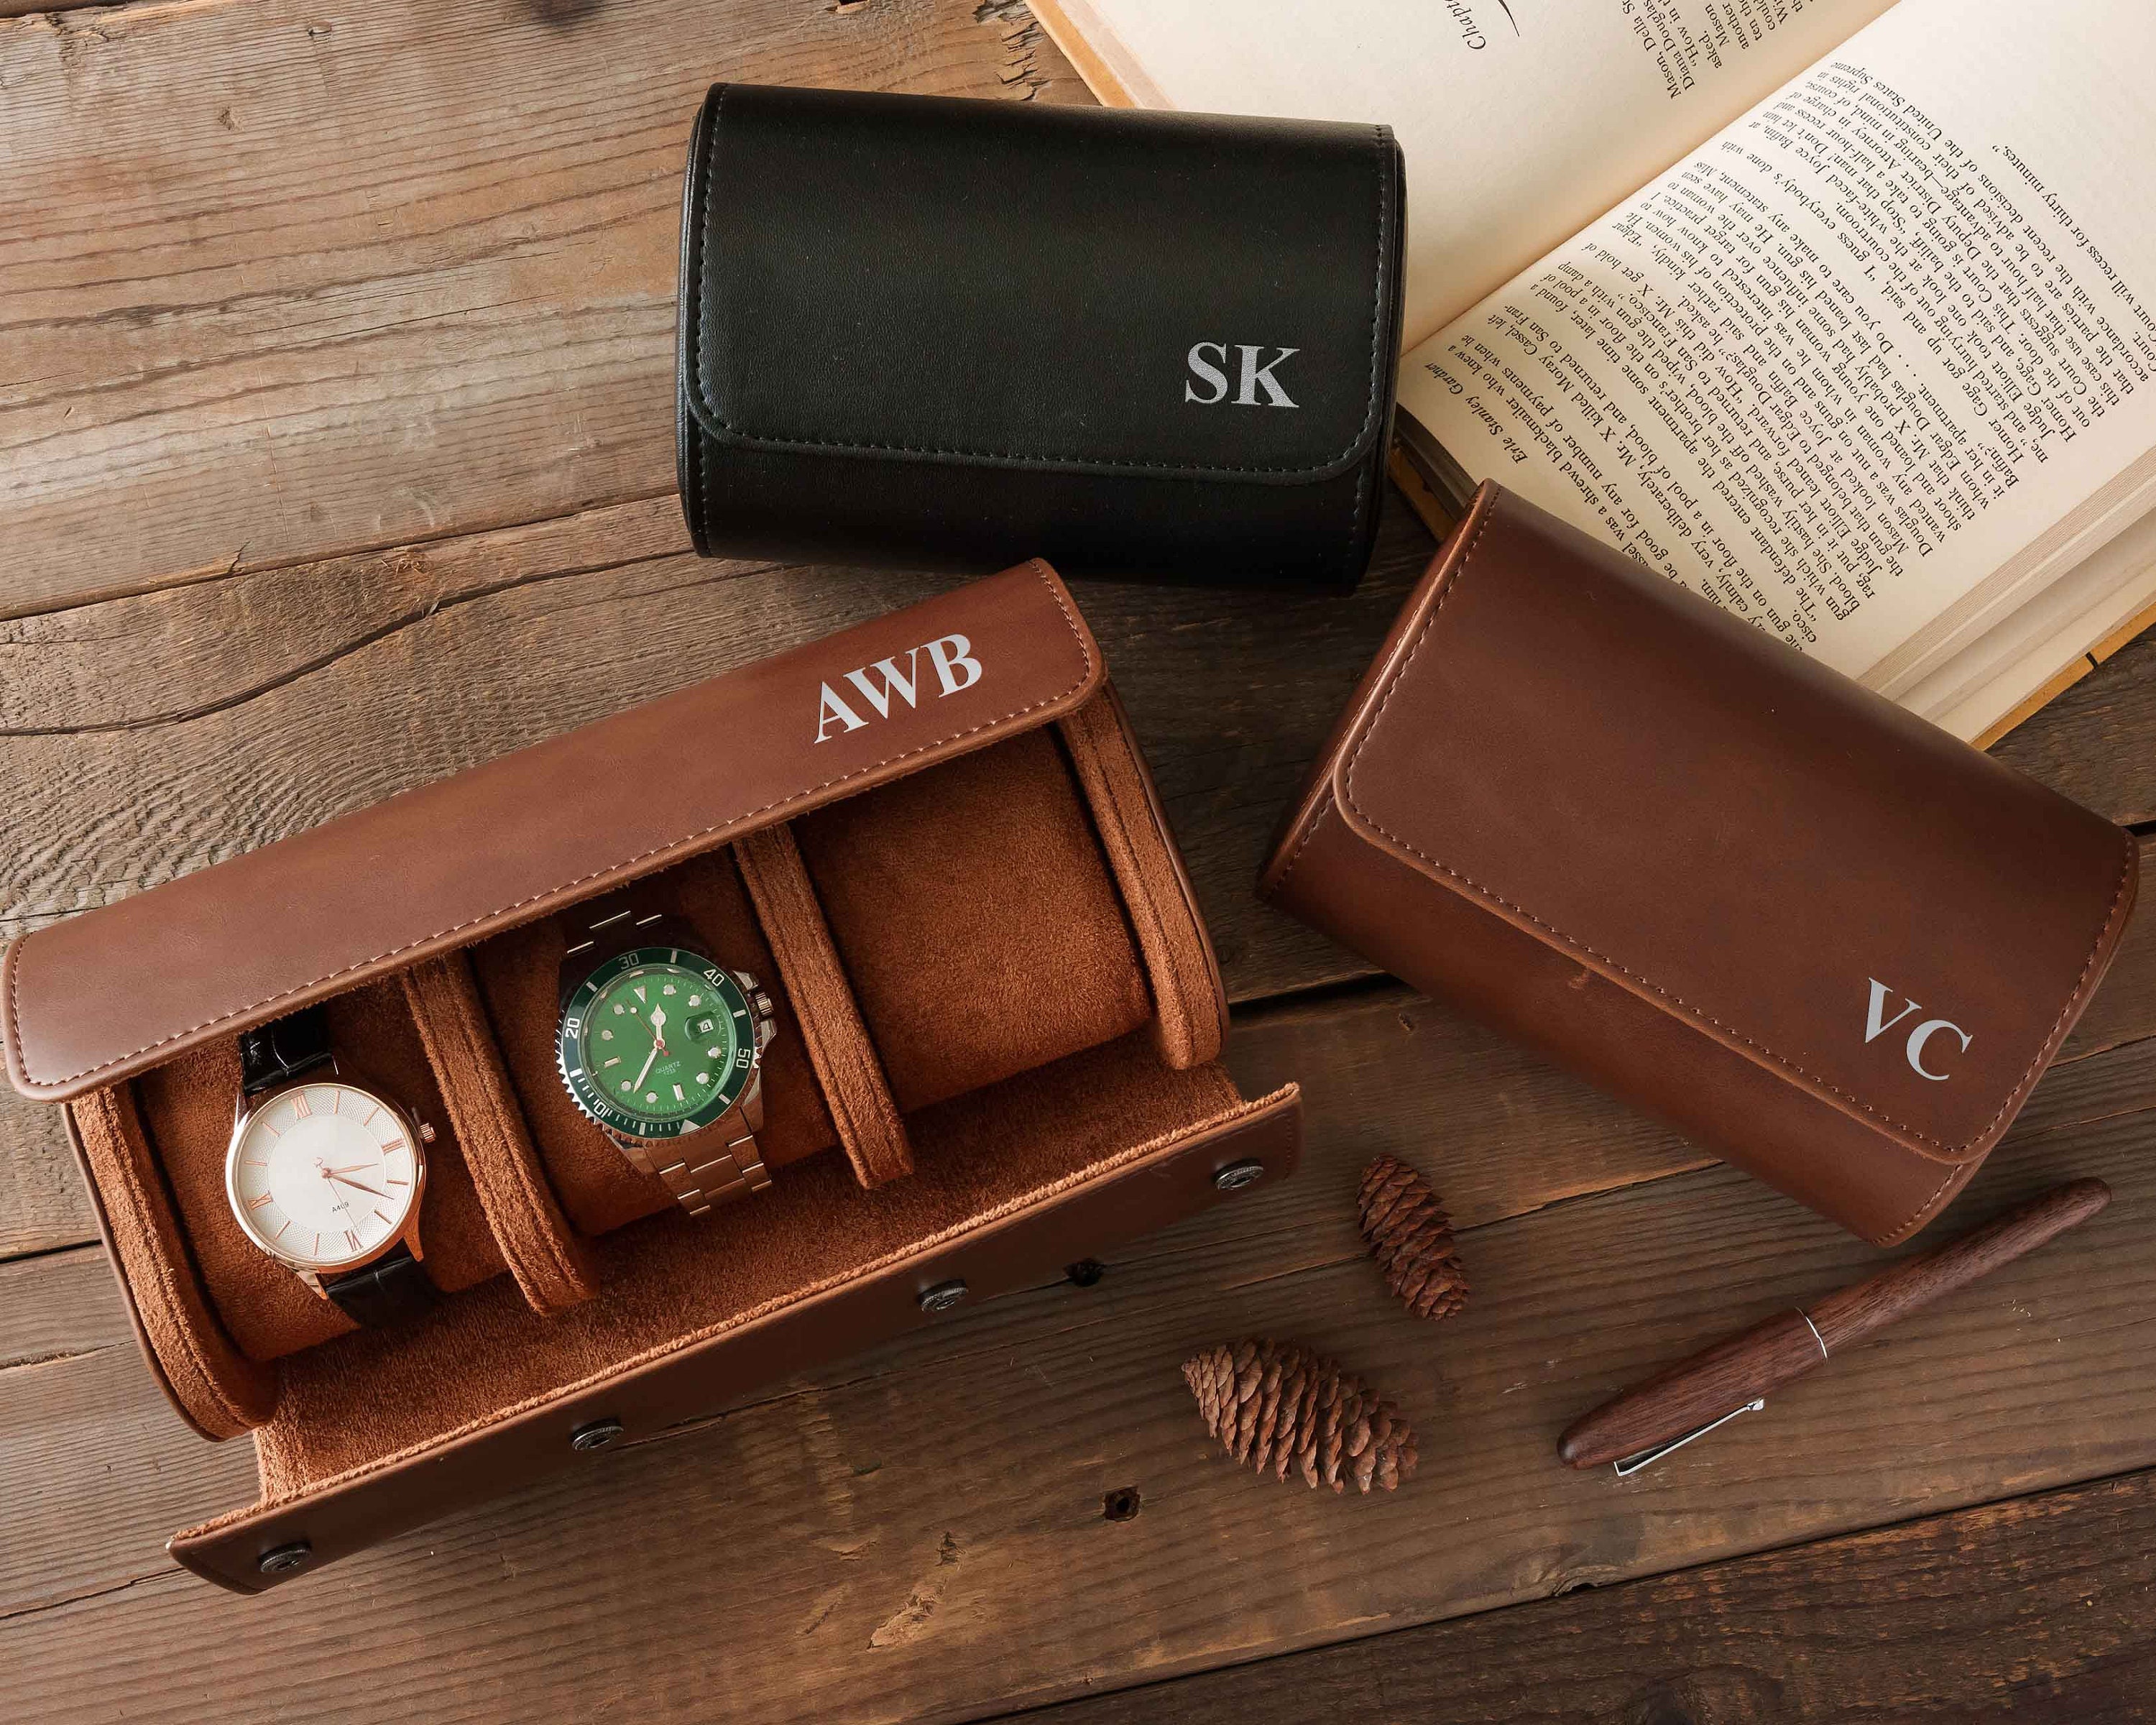  Personalized Watch Case for Men and Women, Customized PU  Leather Travel Watch Case Roll Organizer For Dad, Engraved Name,  Handcrafted Gift for Grandpa, Boy Friend, Watch Collector, Father's Day  Gifts 